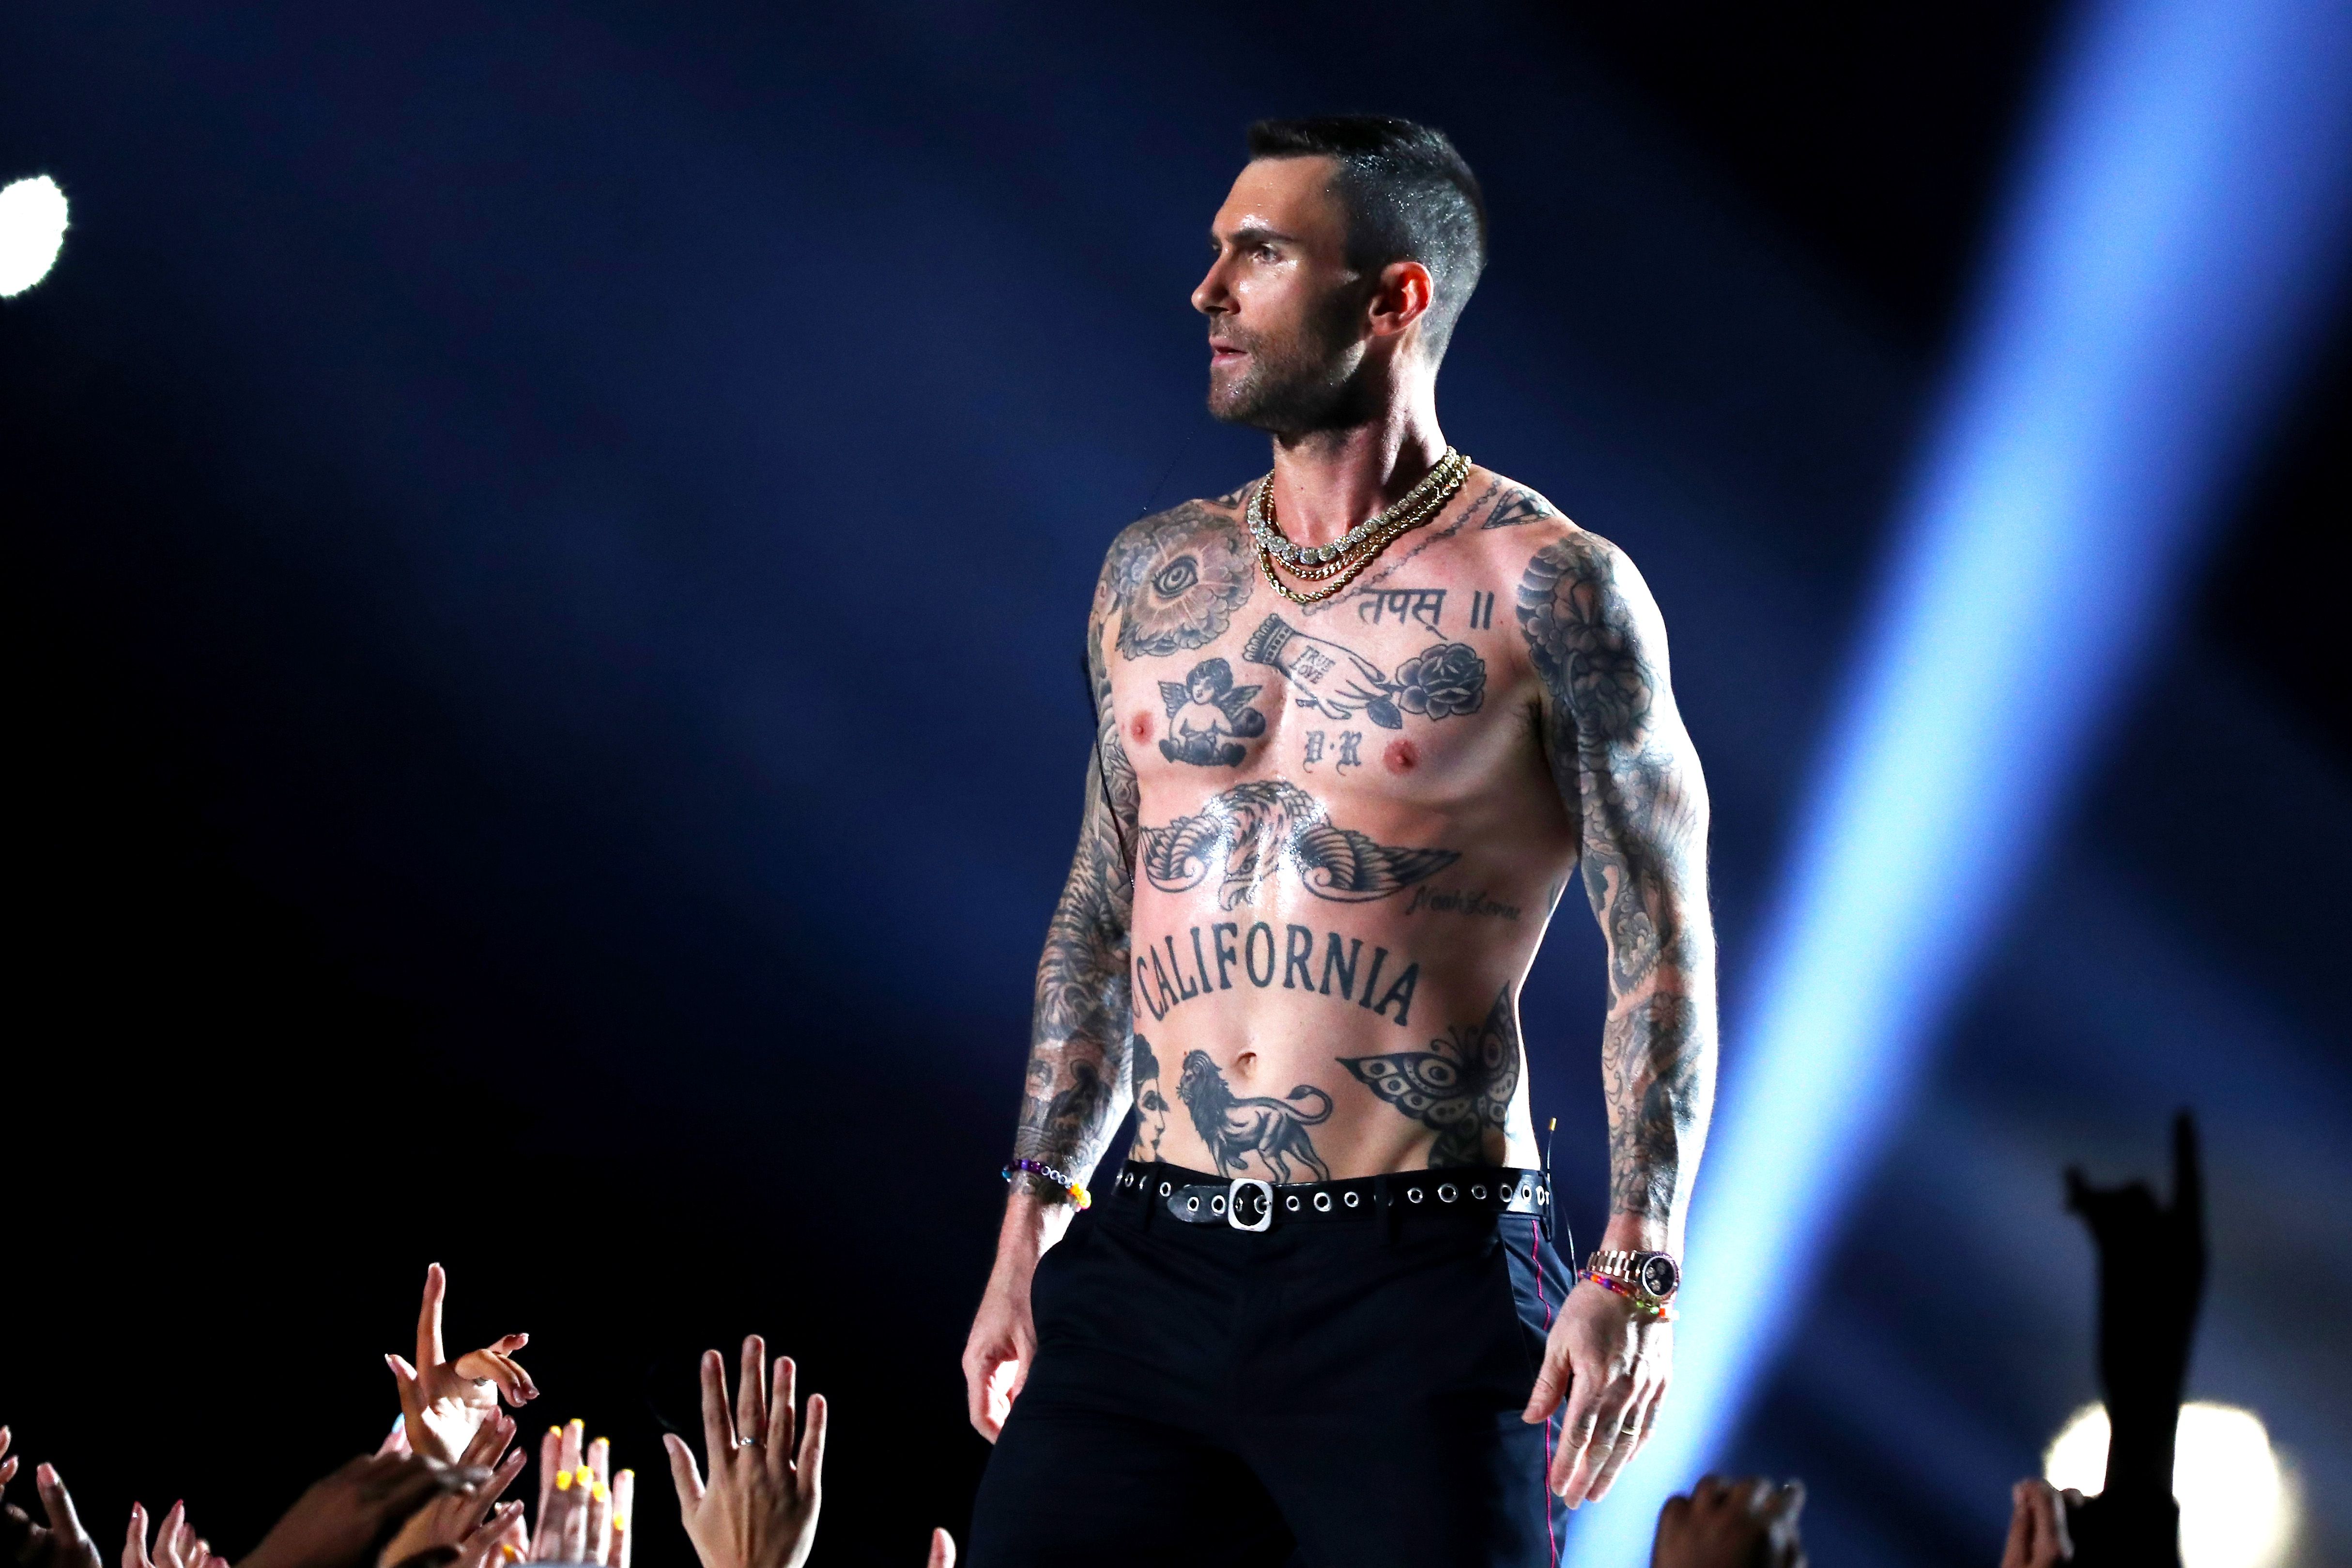 Adam Levines New Leg Tattoo Is On Display in Shirtless Workout Video  Photo 4540432  Adam Levine Shirtless Photos  Just Jared Entertainment  News